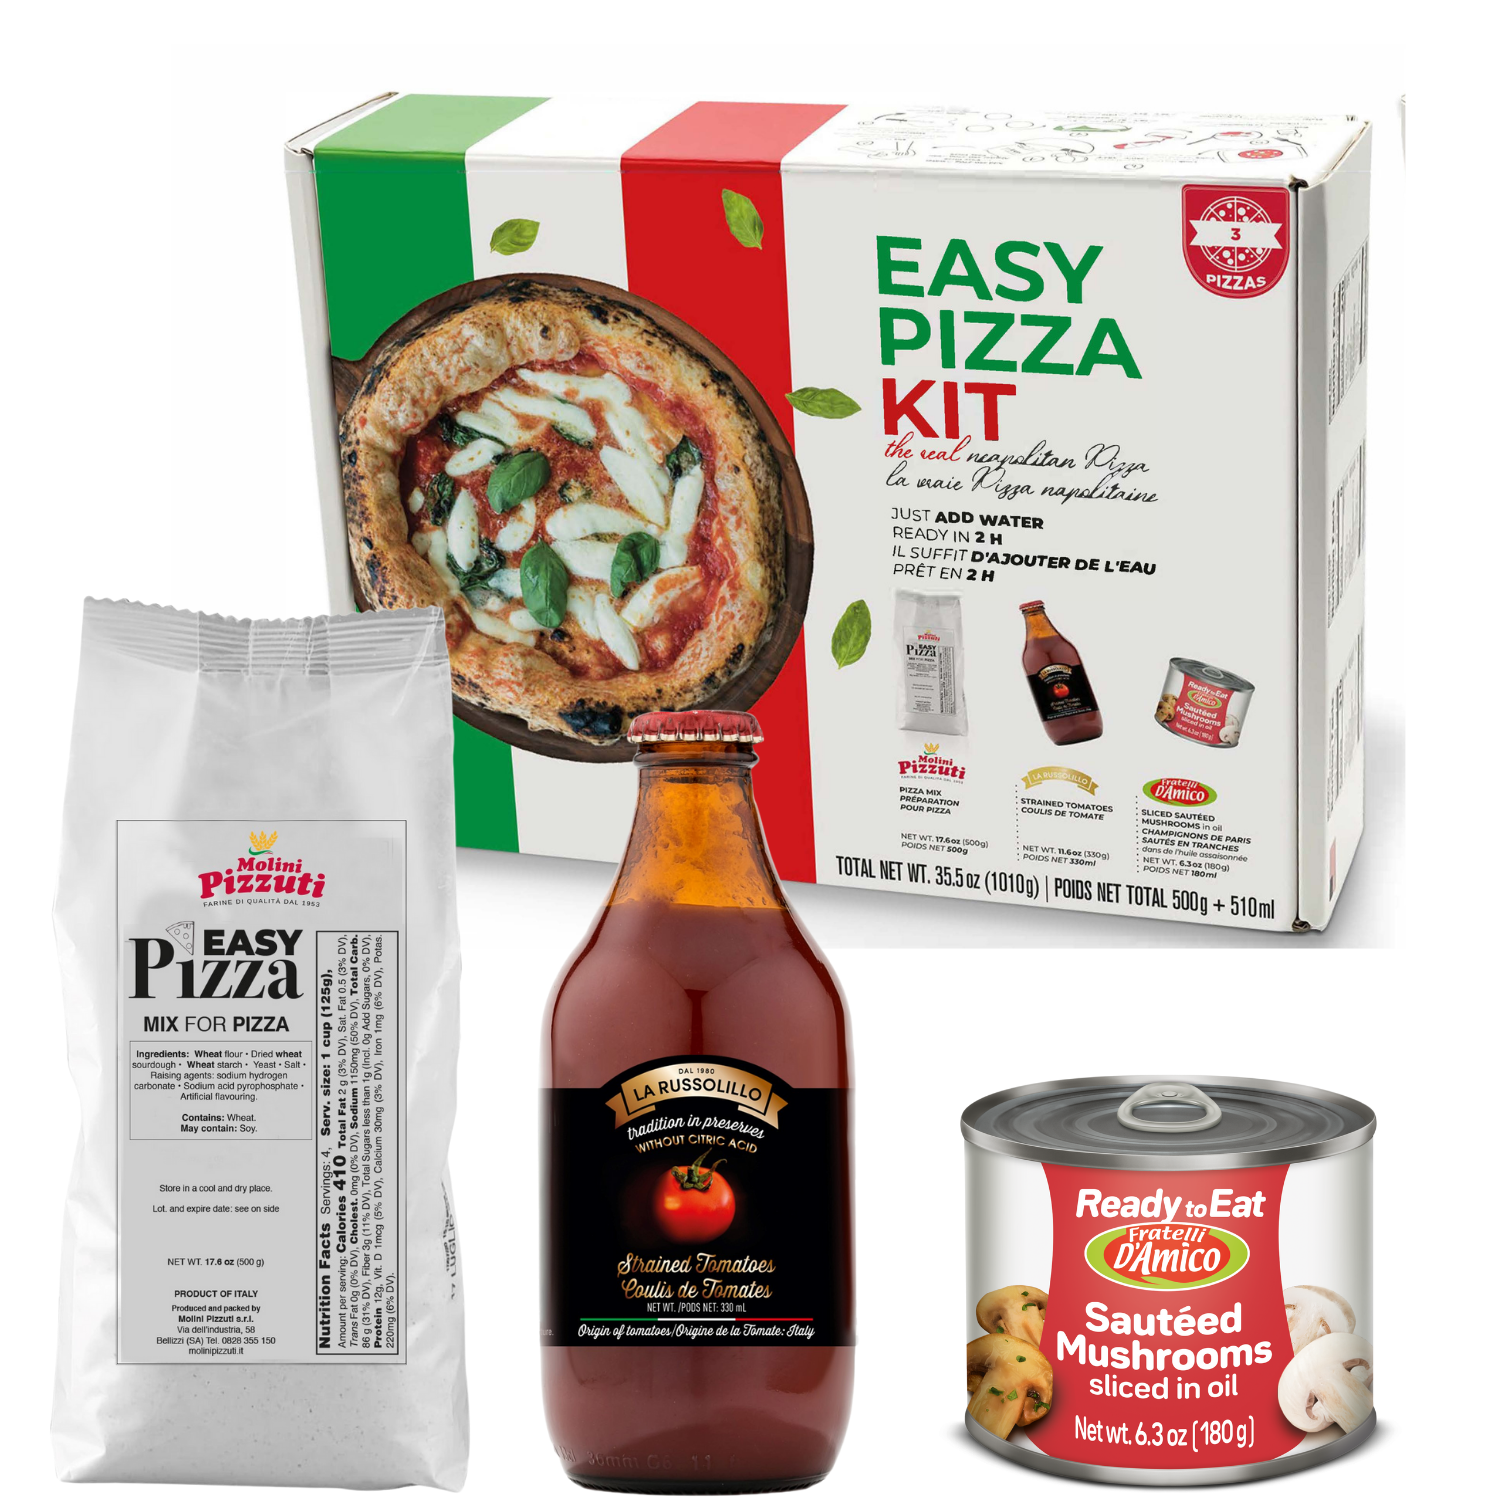 Pizza Kit from Italy, authentic homemade Neapolitan Pizzas, just add water,  ready in 2 hours, Product of Italy, for 3 portions, By Fratelli D'Amico